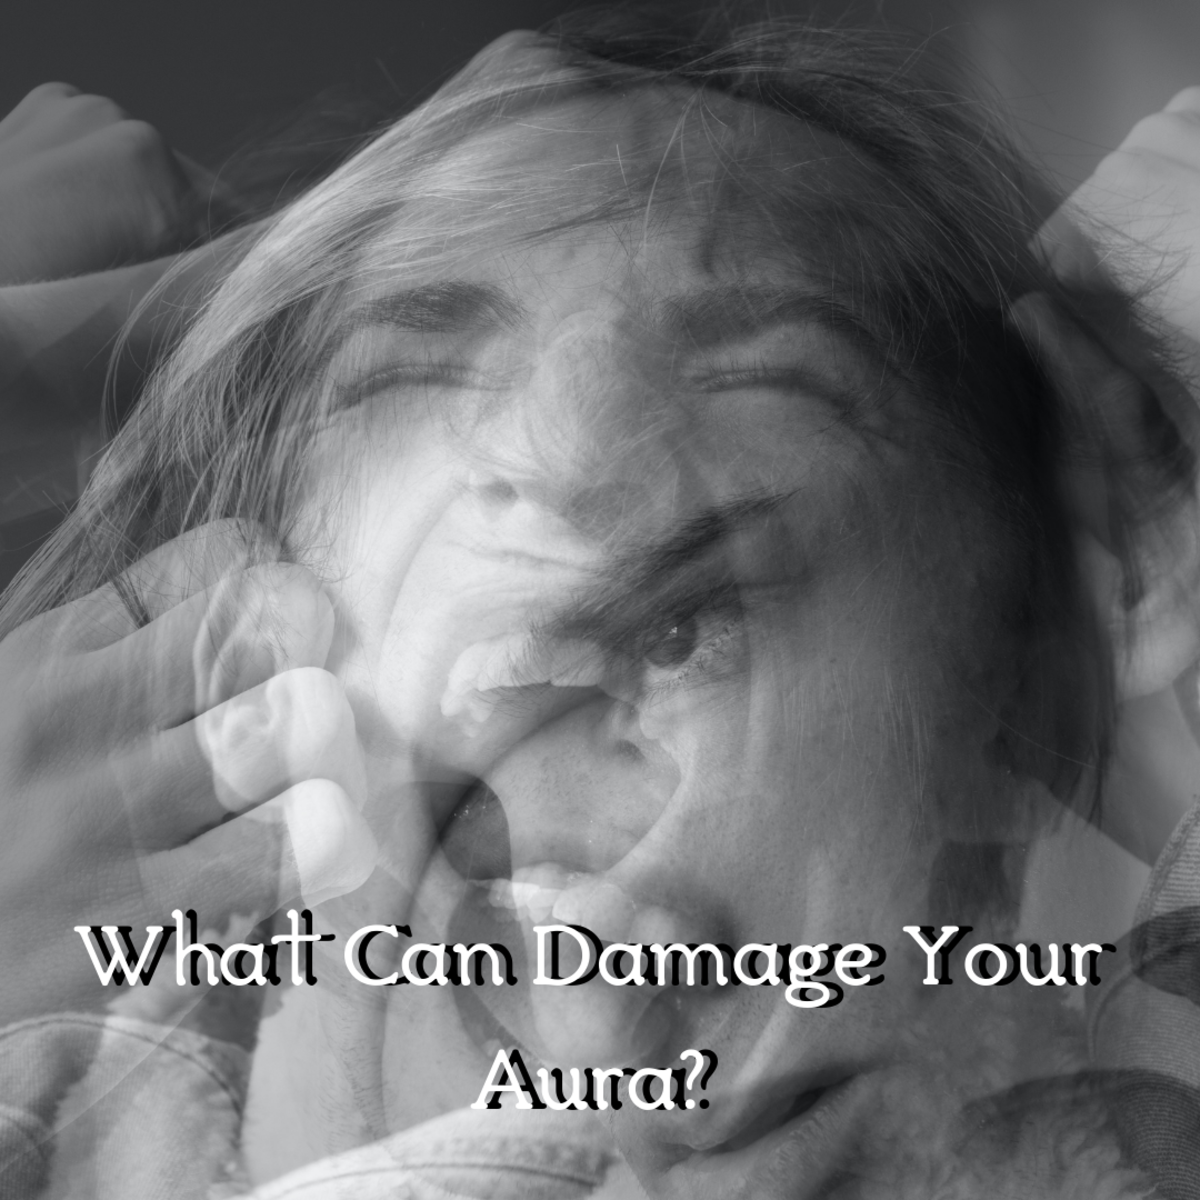 What can damage your aura?